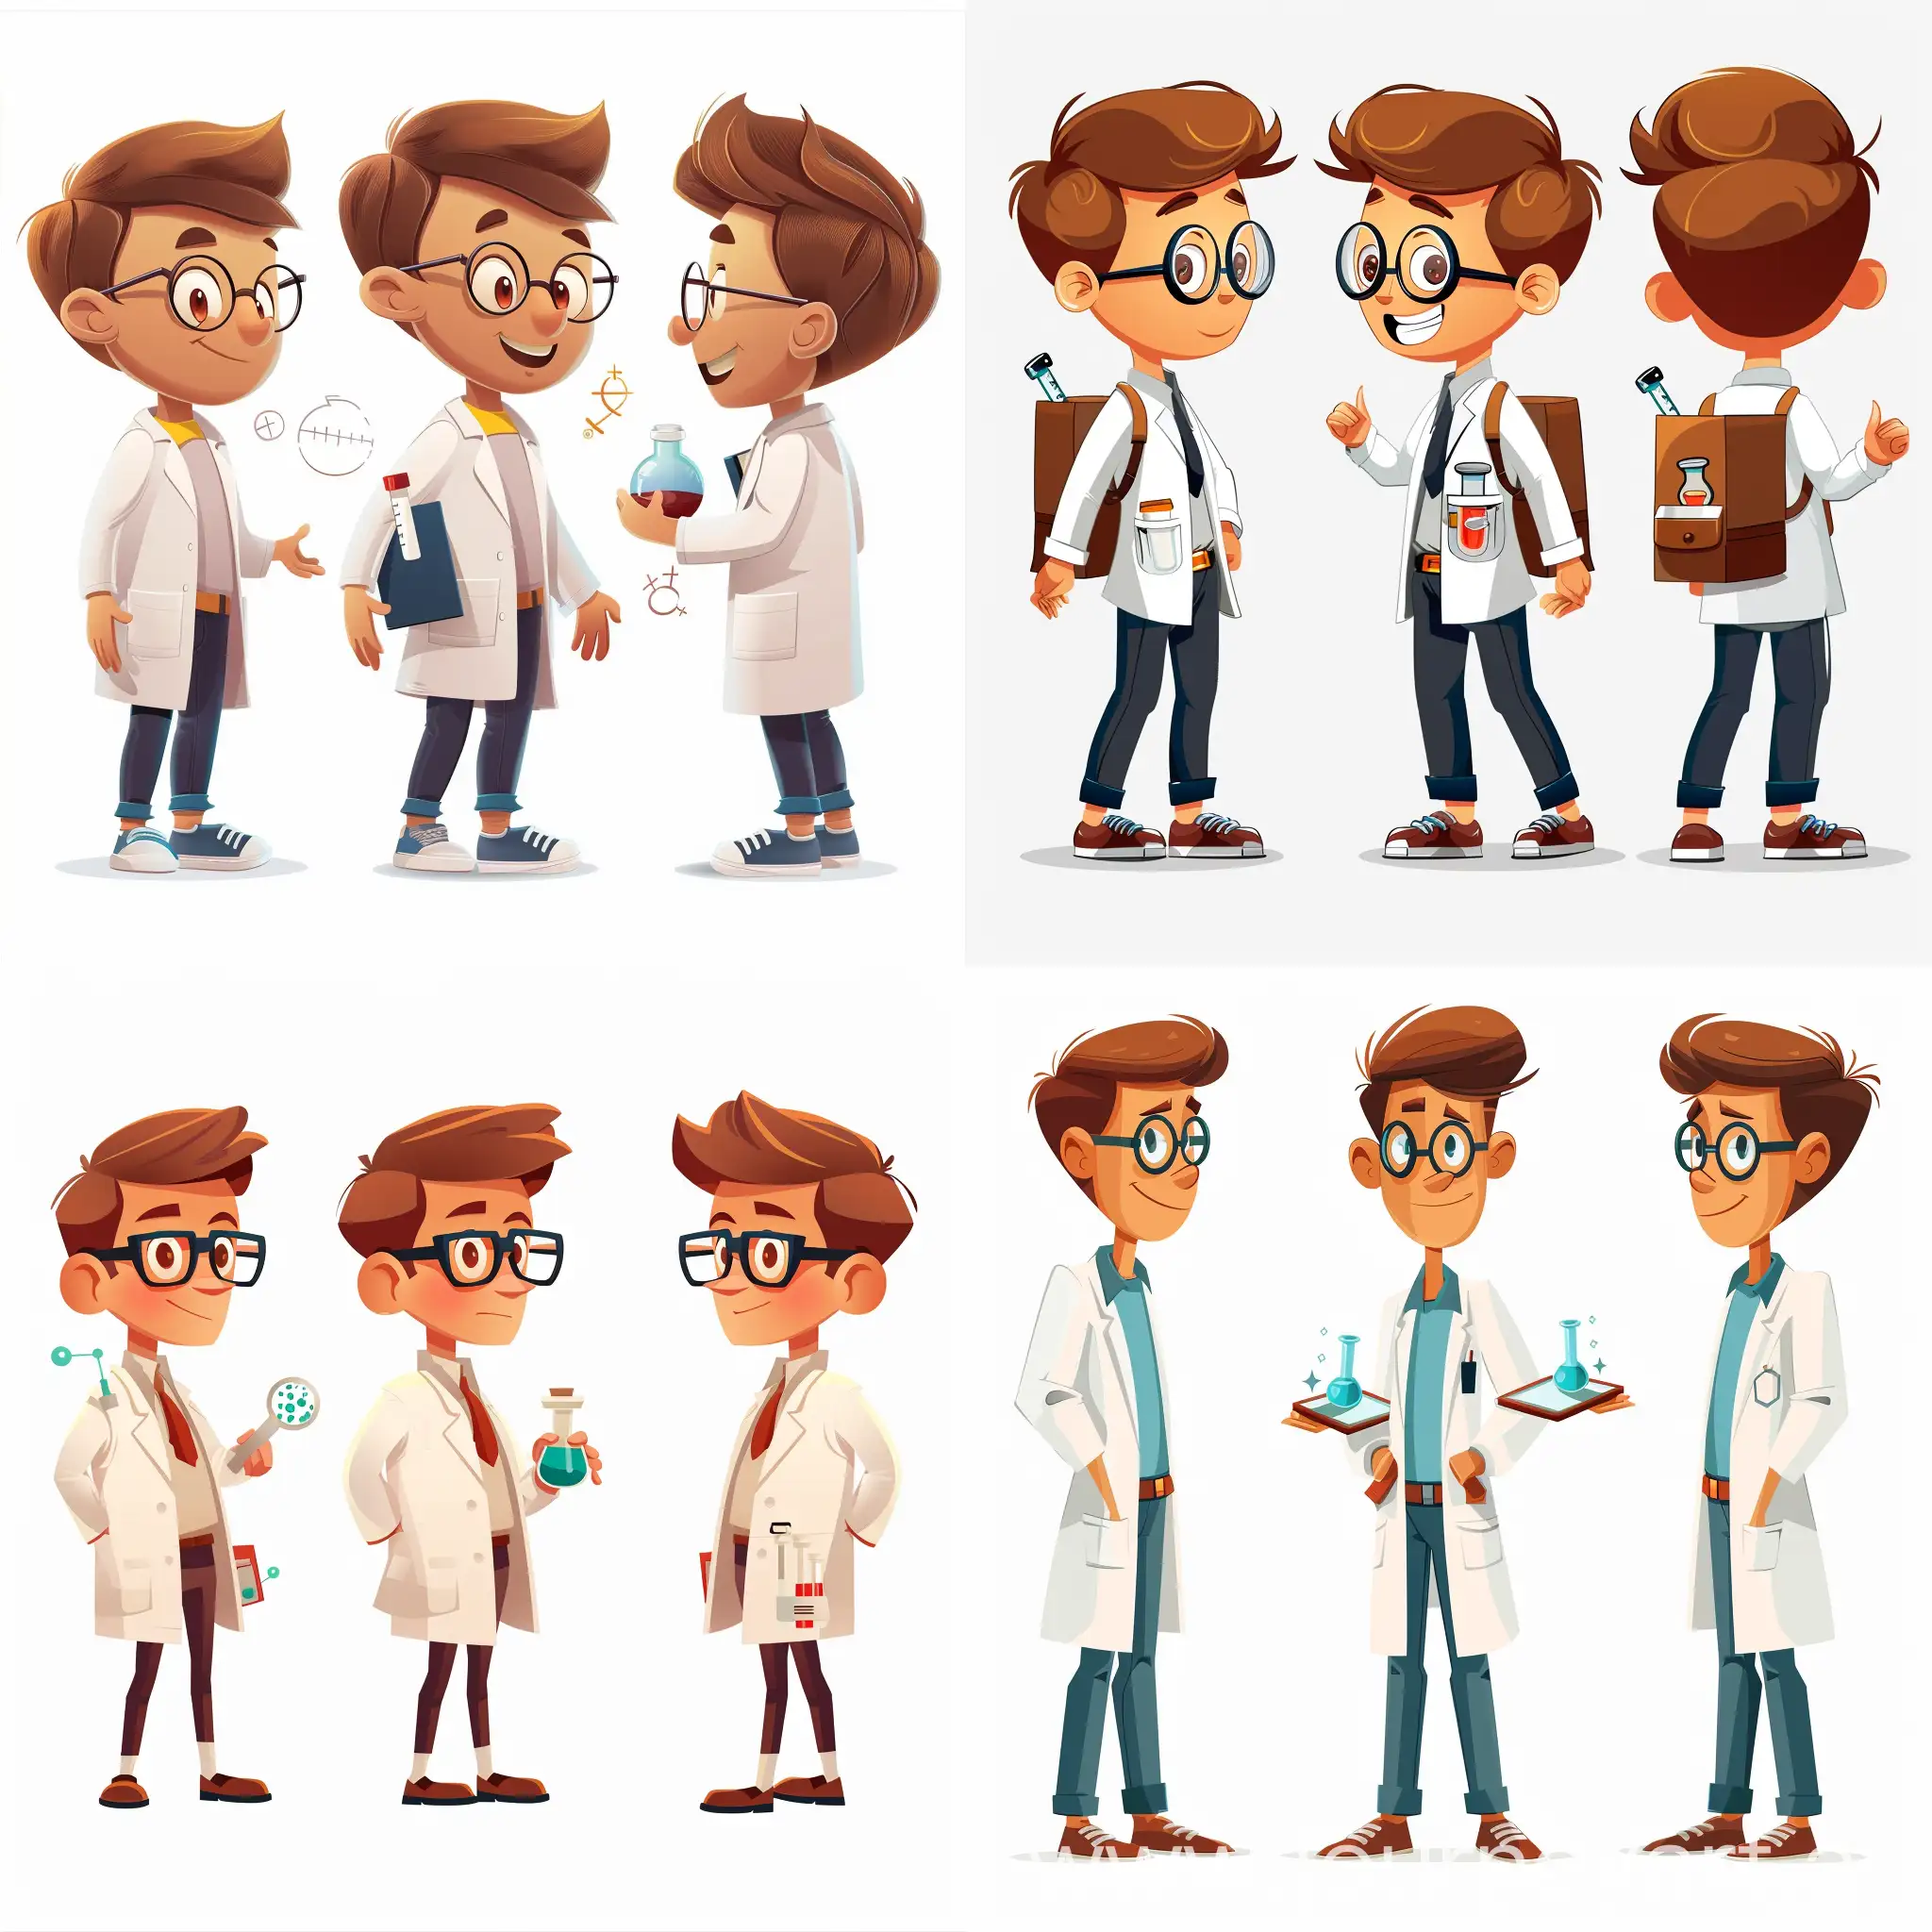 Transparent Background. Funny cartoon style character related to school. It also has science-related attributes. Present the figure in 3 positions: from the front, from the back, from the side